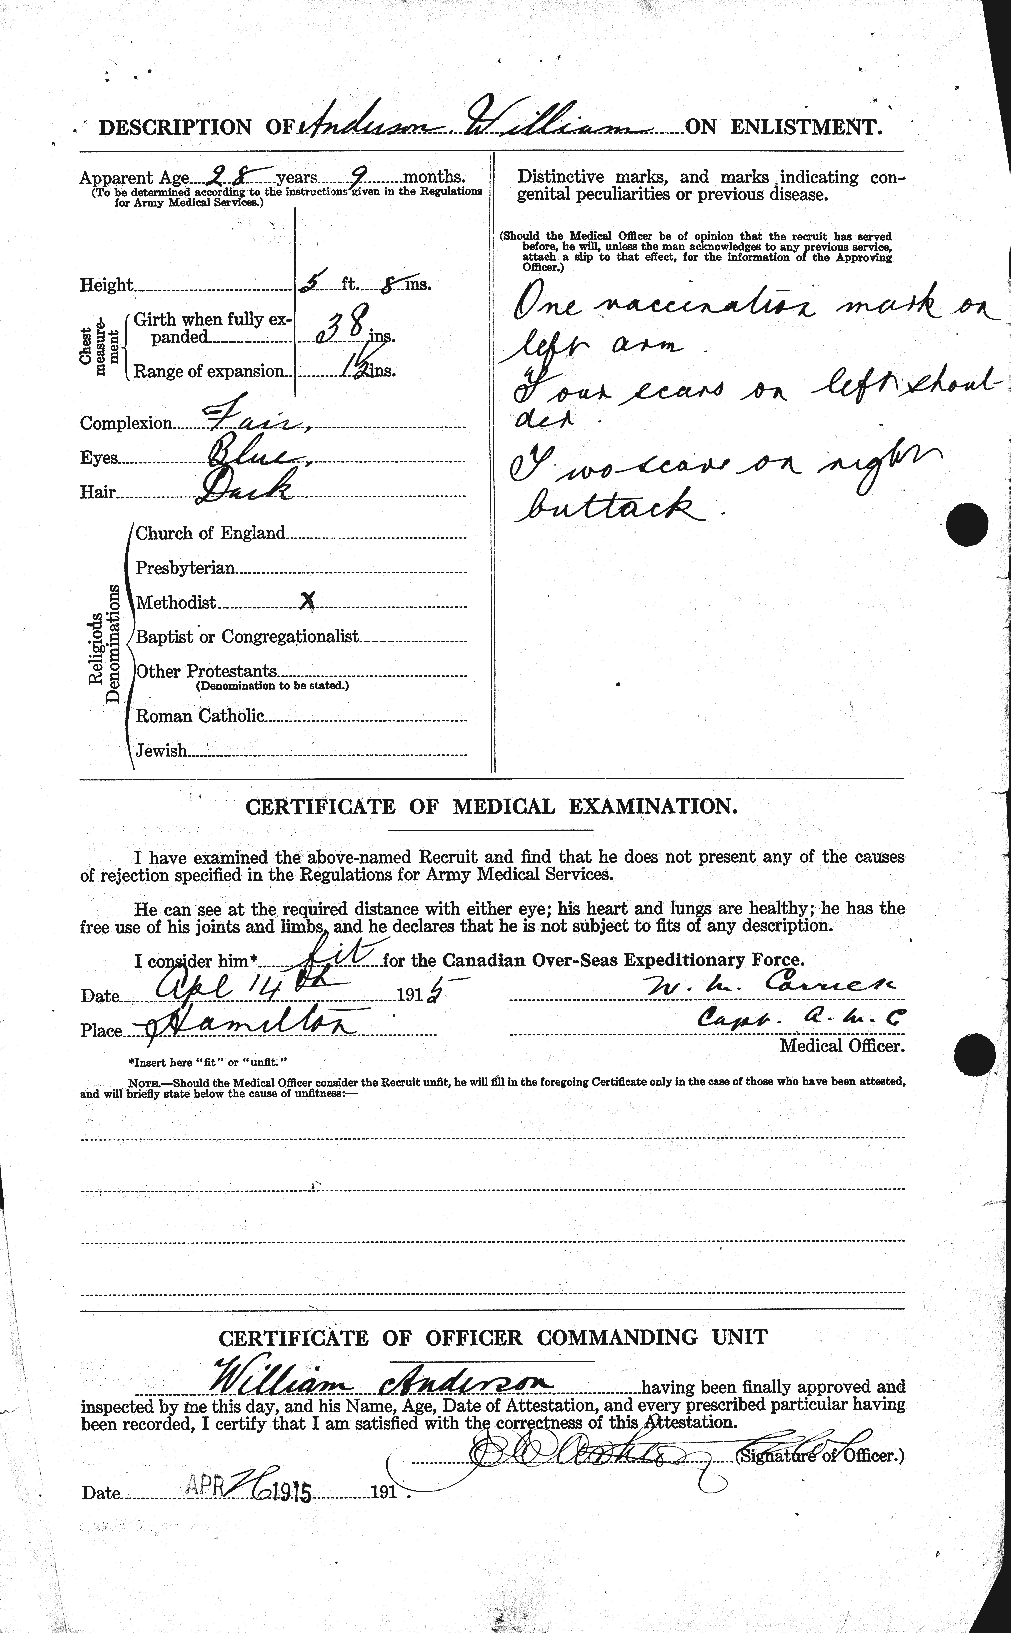 Personnel Records of the First World War - CEF 210764b